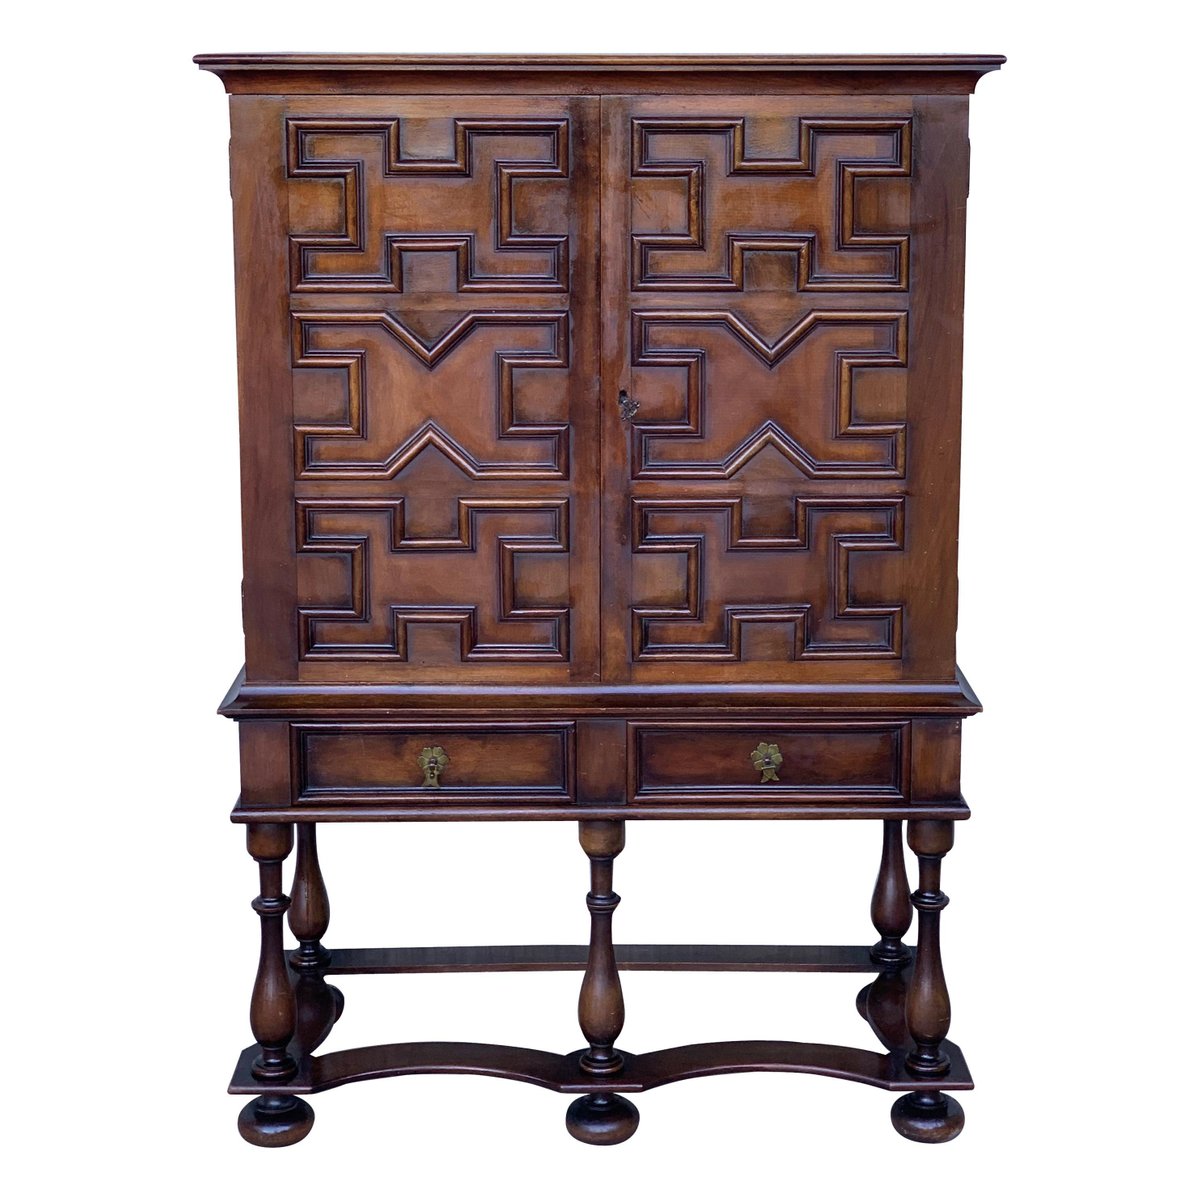 19th century catalan cabinet on stand in carved walnut with iron stretcher PSK-1002618